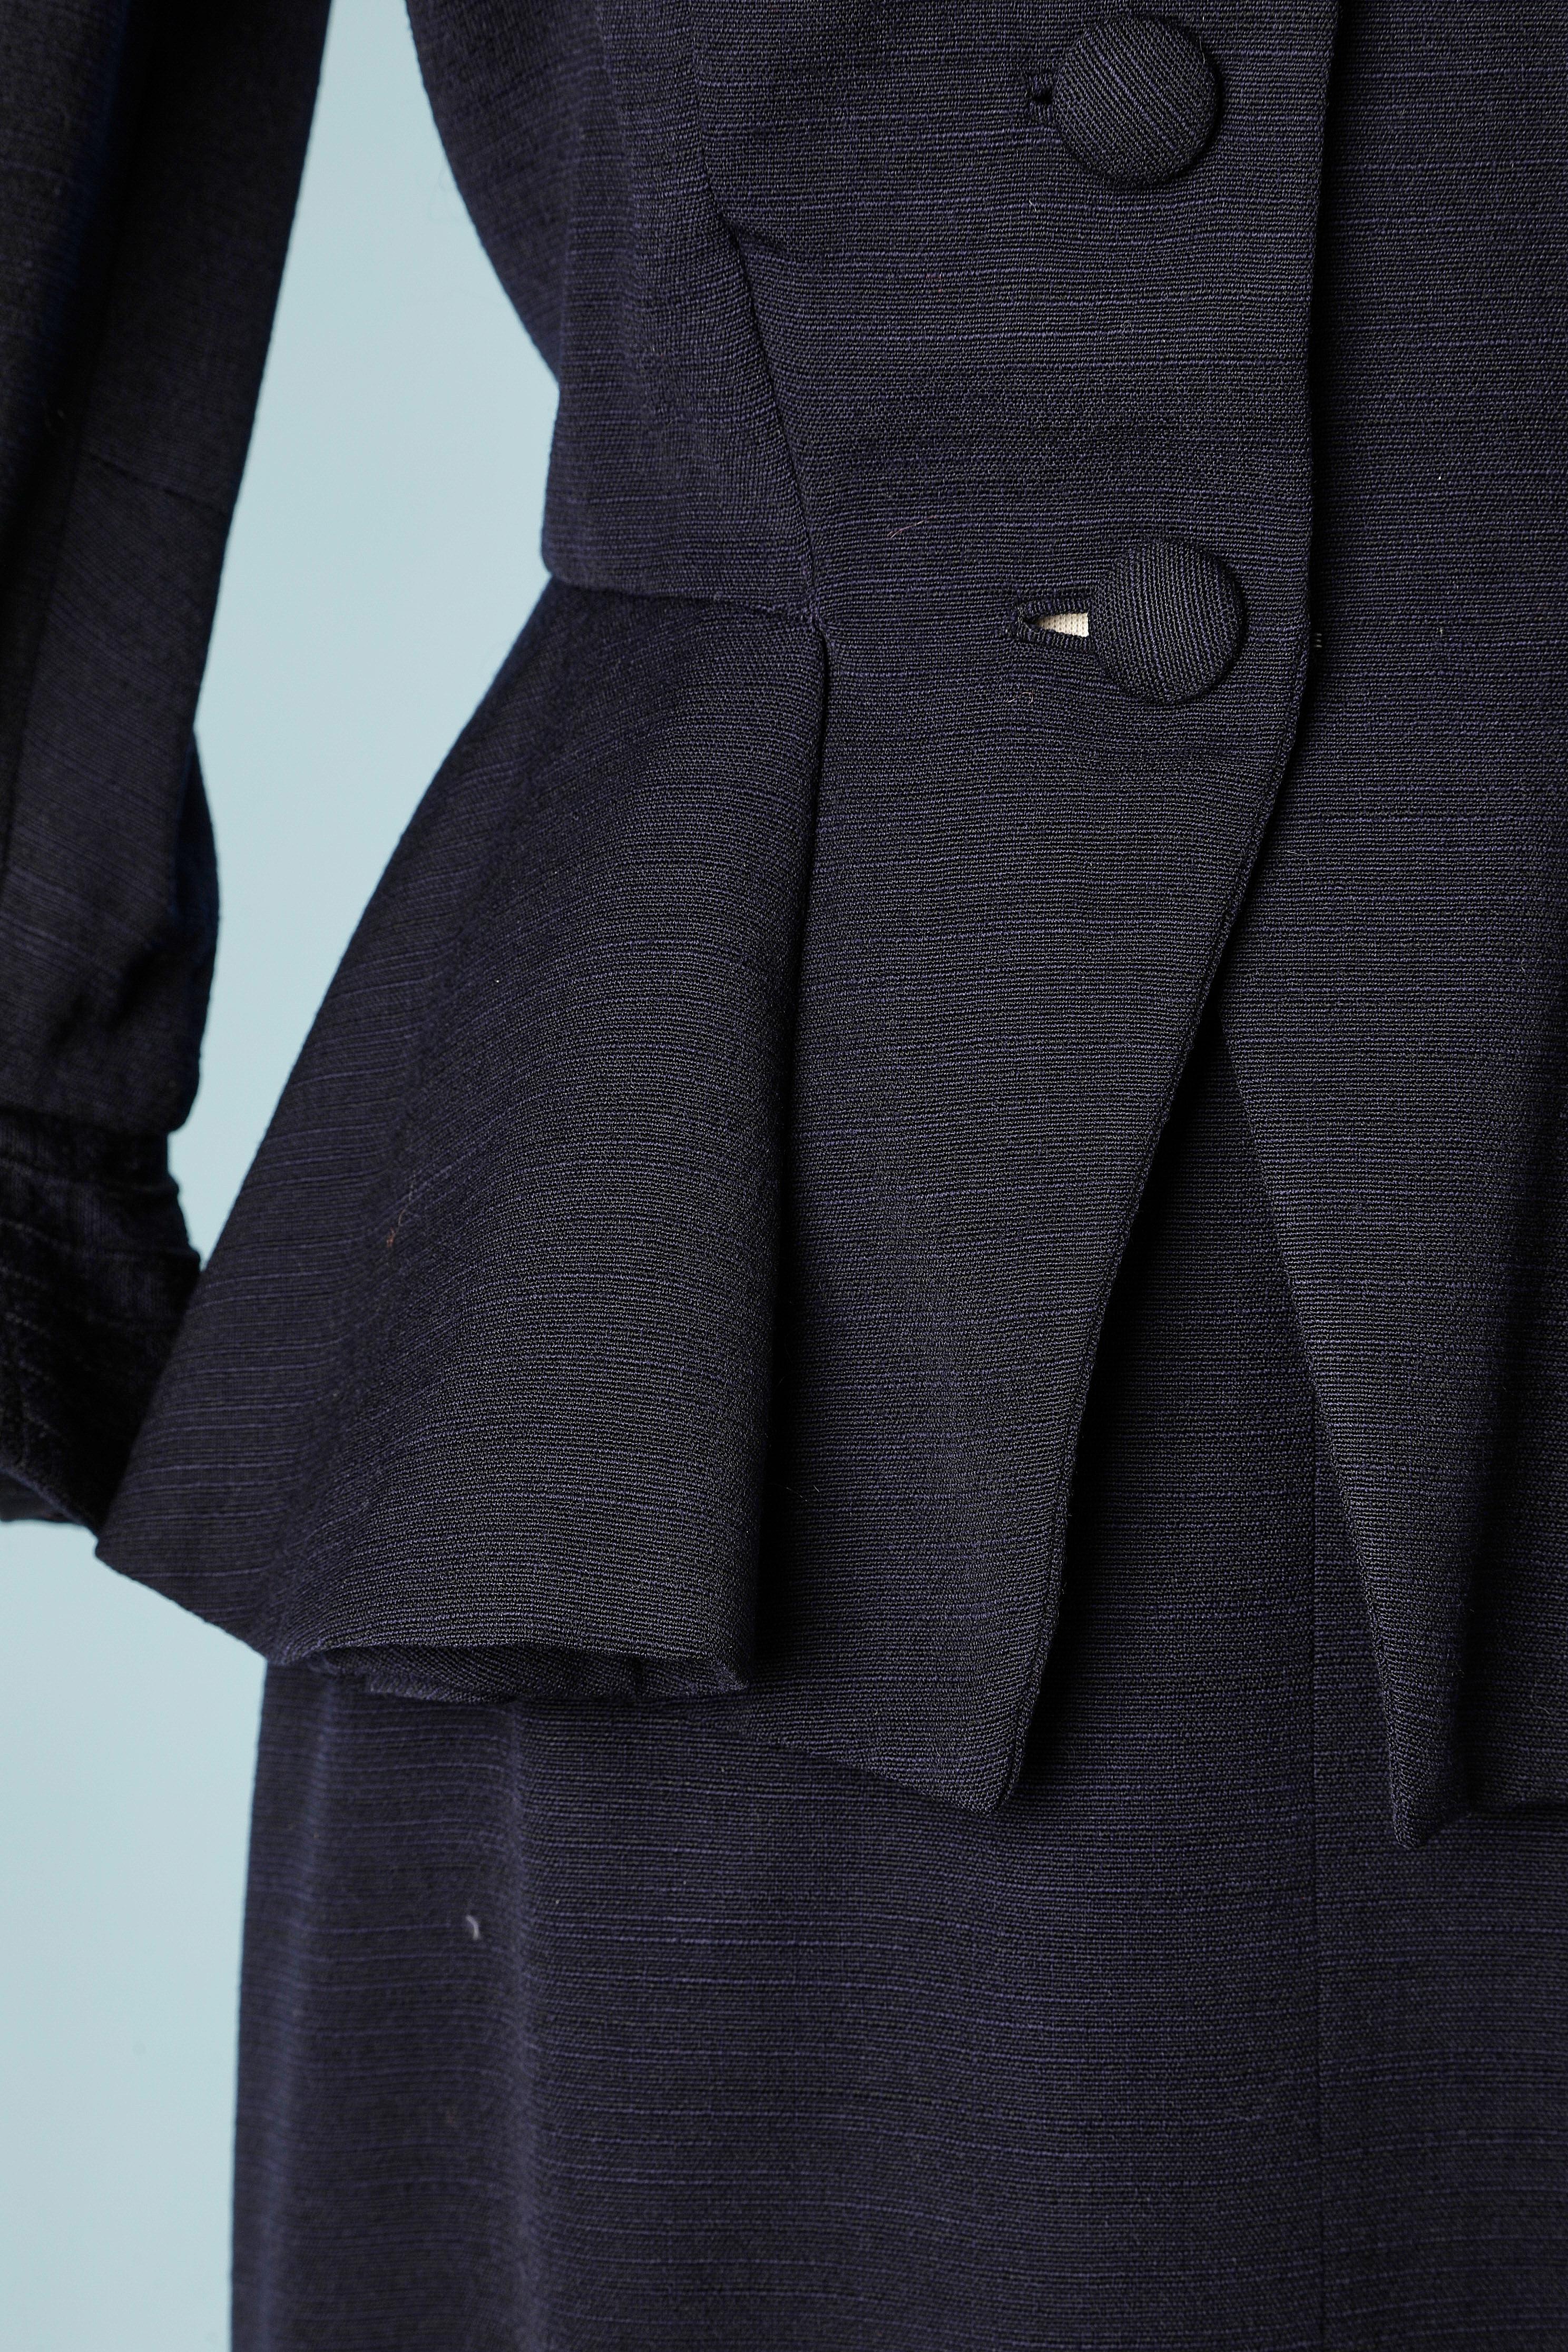 Black Navy blue wool skirt suit with top-stitching Lilli Ann Circa 1940 For Sale